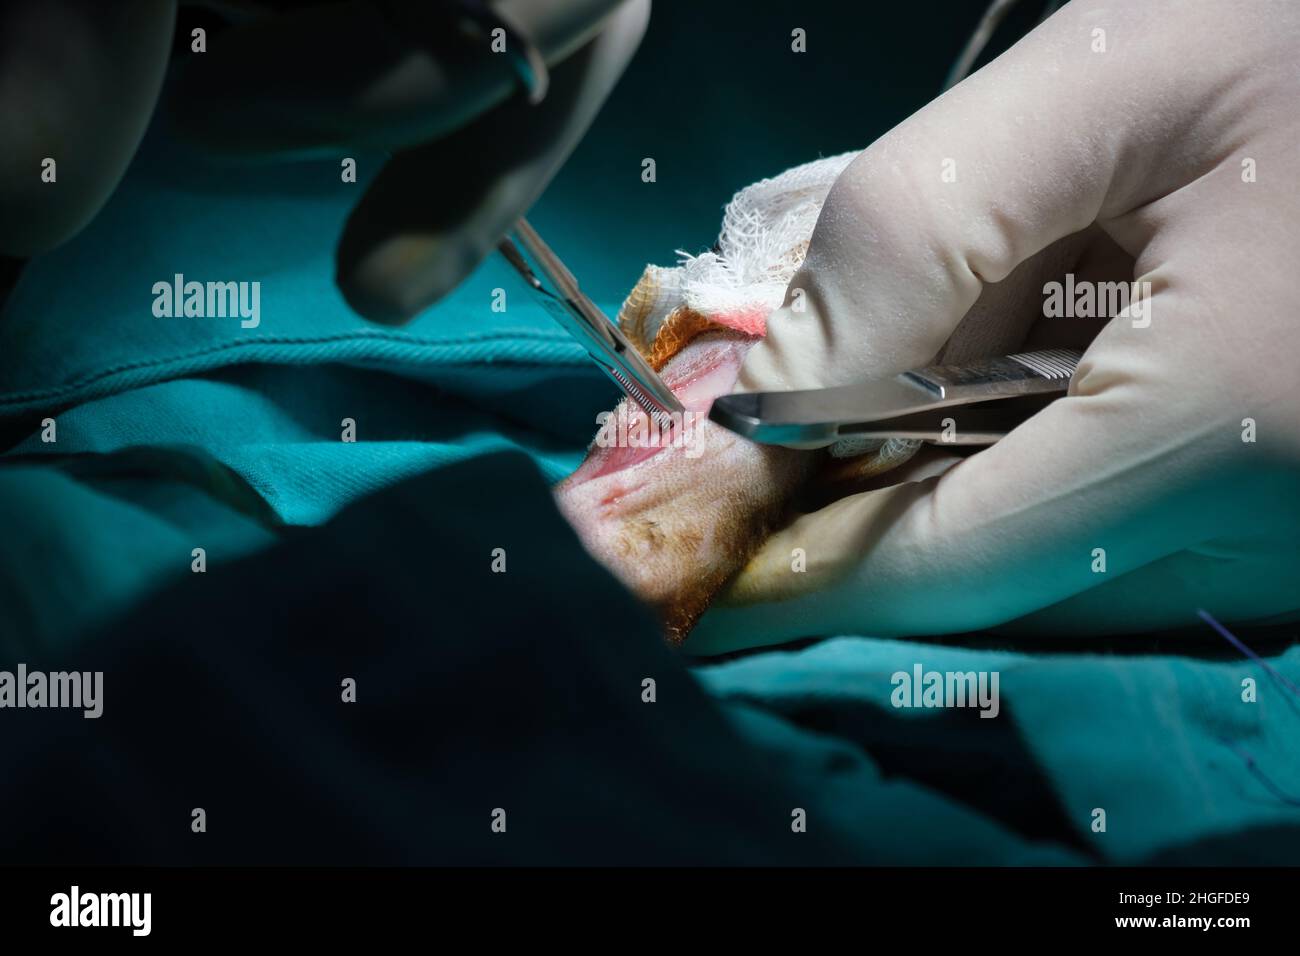 A surgeon and veterinarians performing an operation on a cat in an animal hospital Stock Photo